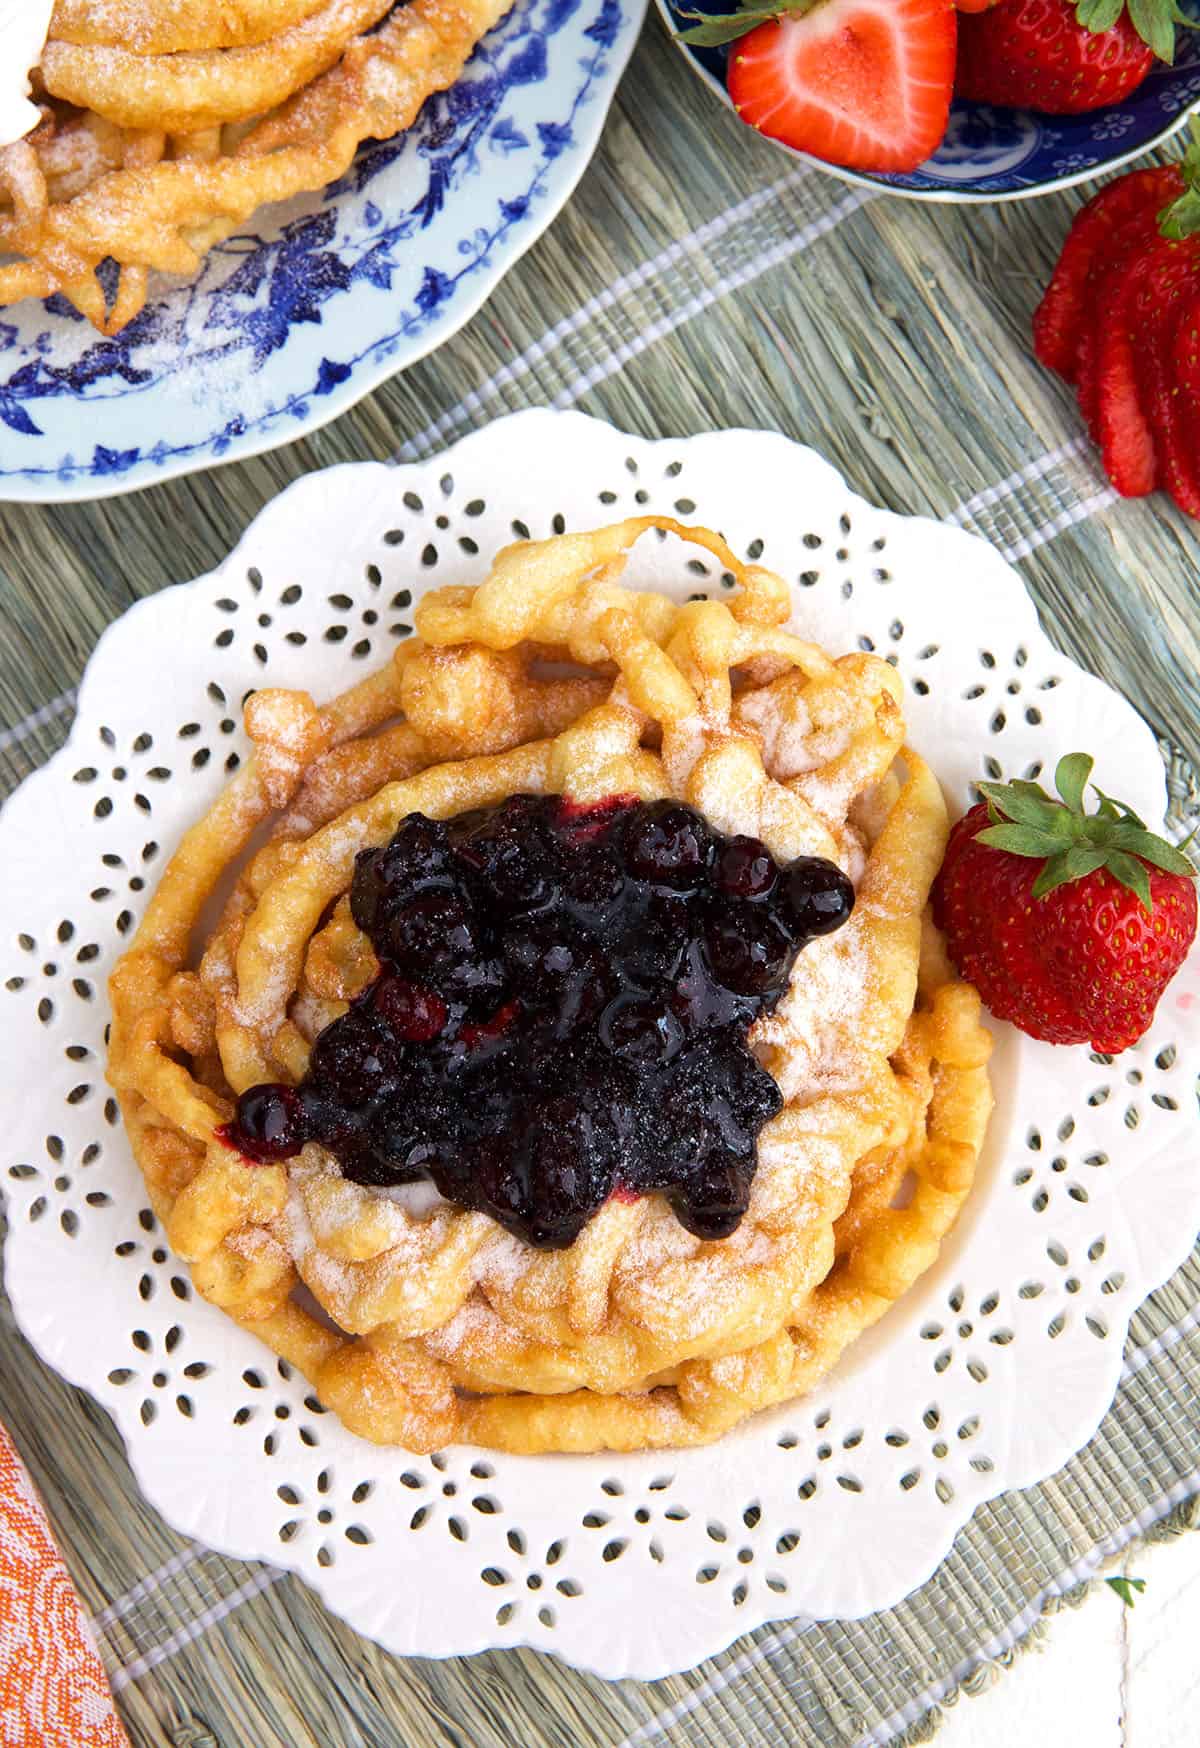 Blueberry jam is placed on top of a cooked funnel cake. 